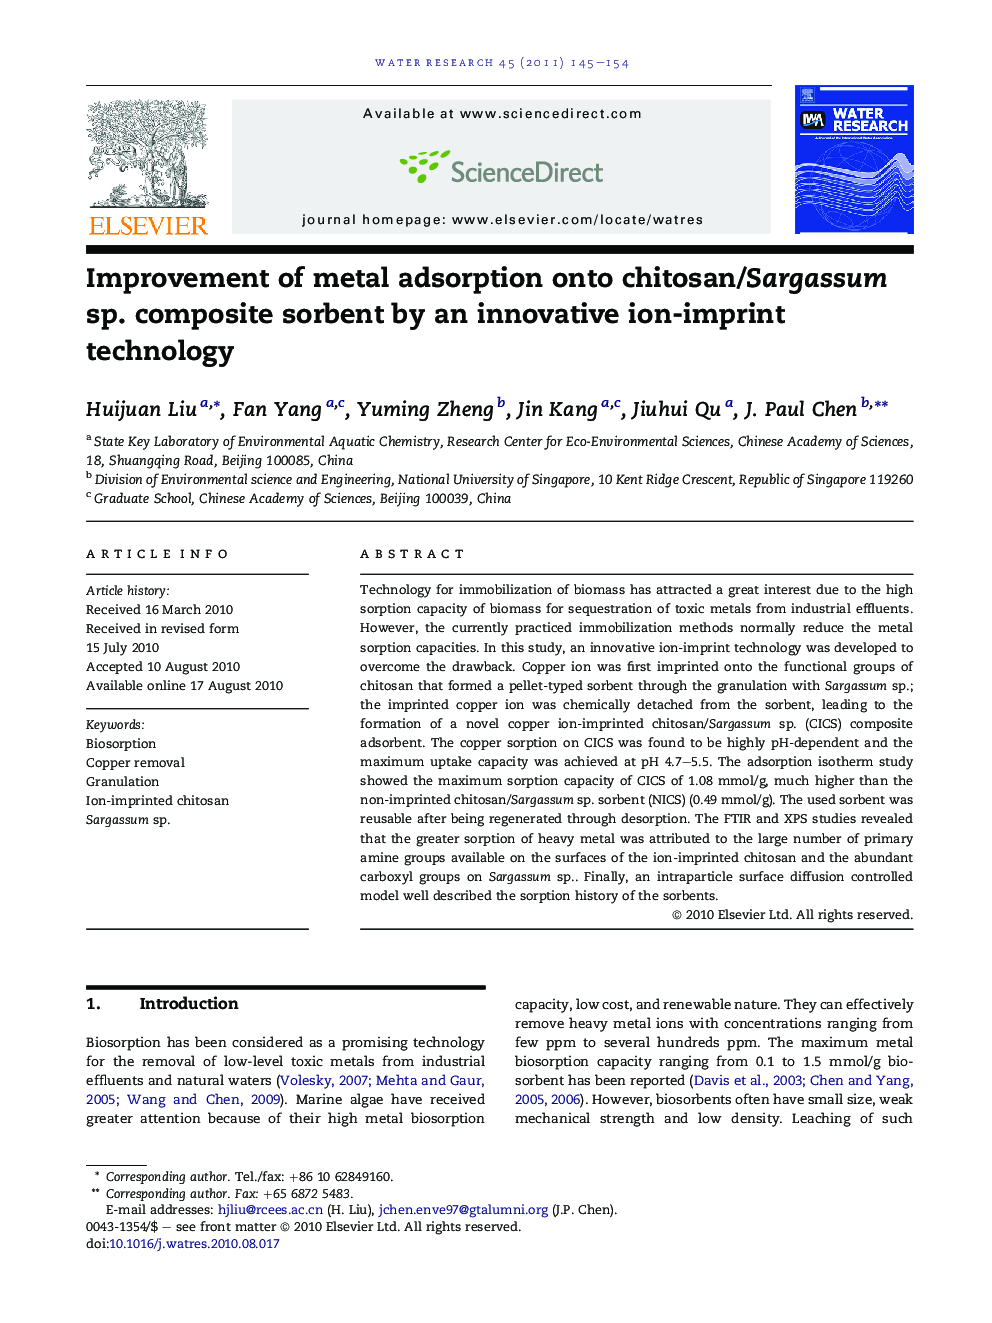 Improvement of metal adsorption onto chitosan/Sargassum sp. composite sorbent by an innovative ion-imprint technology